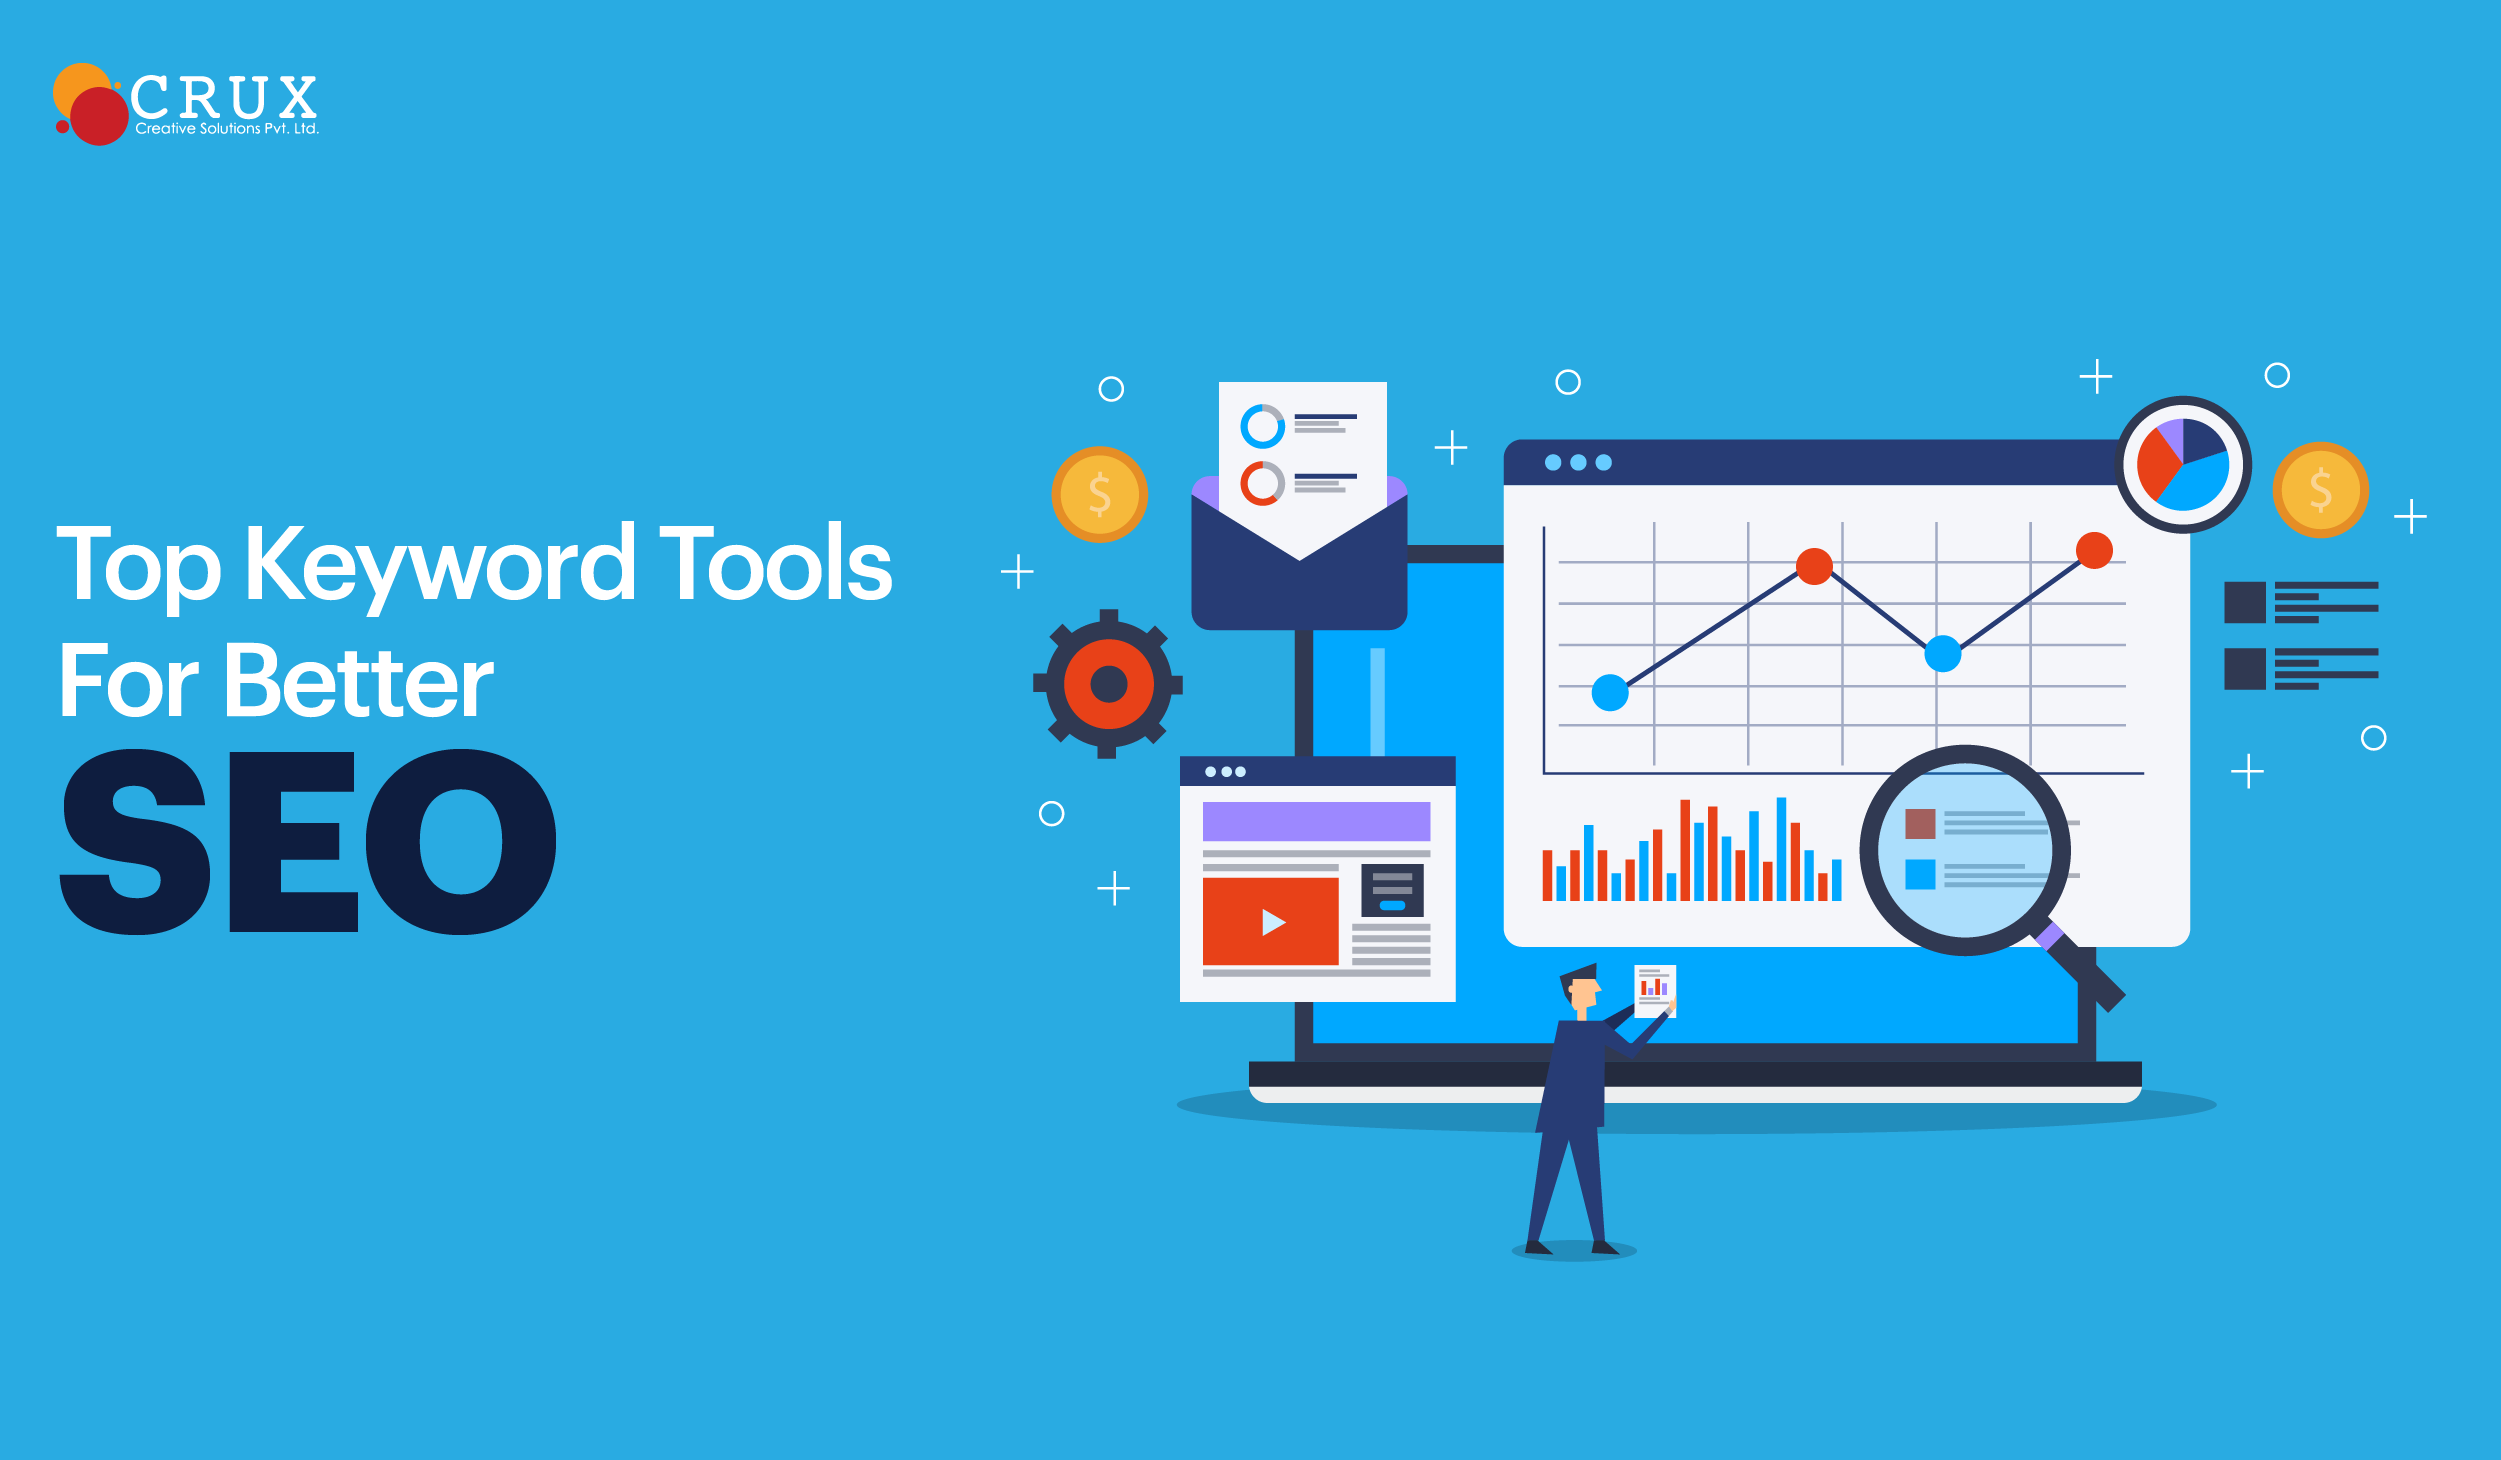 Keywords tools for better SEO